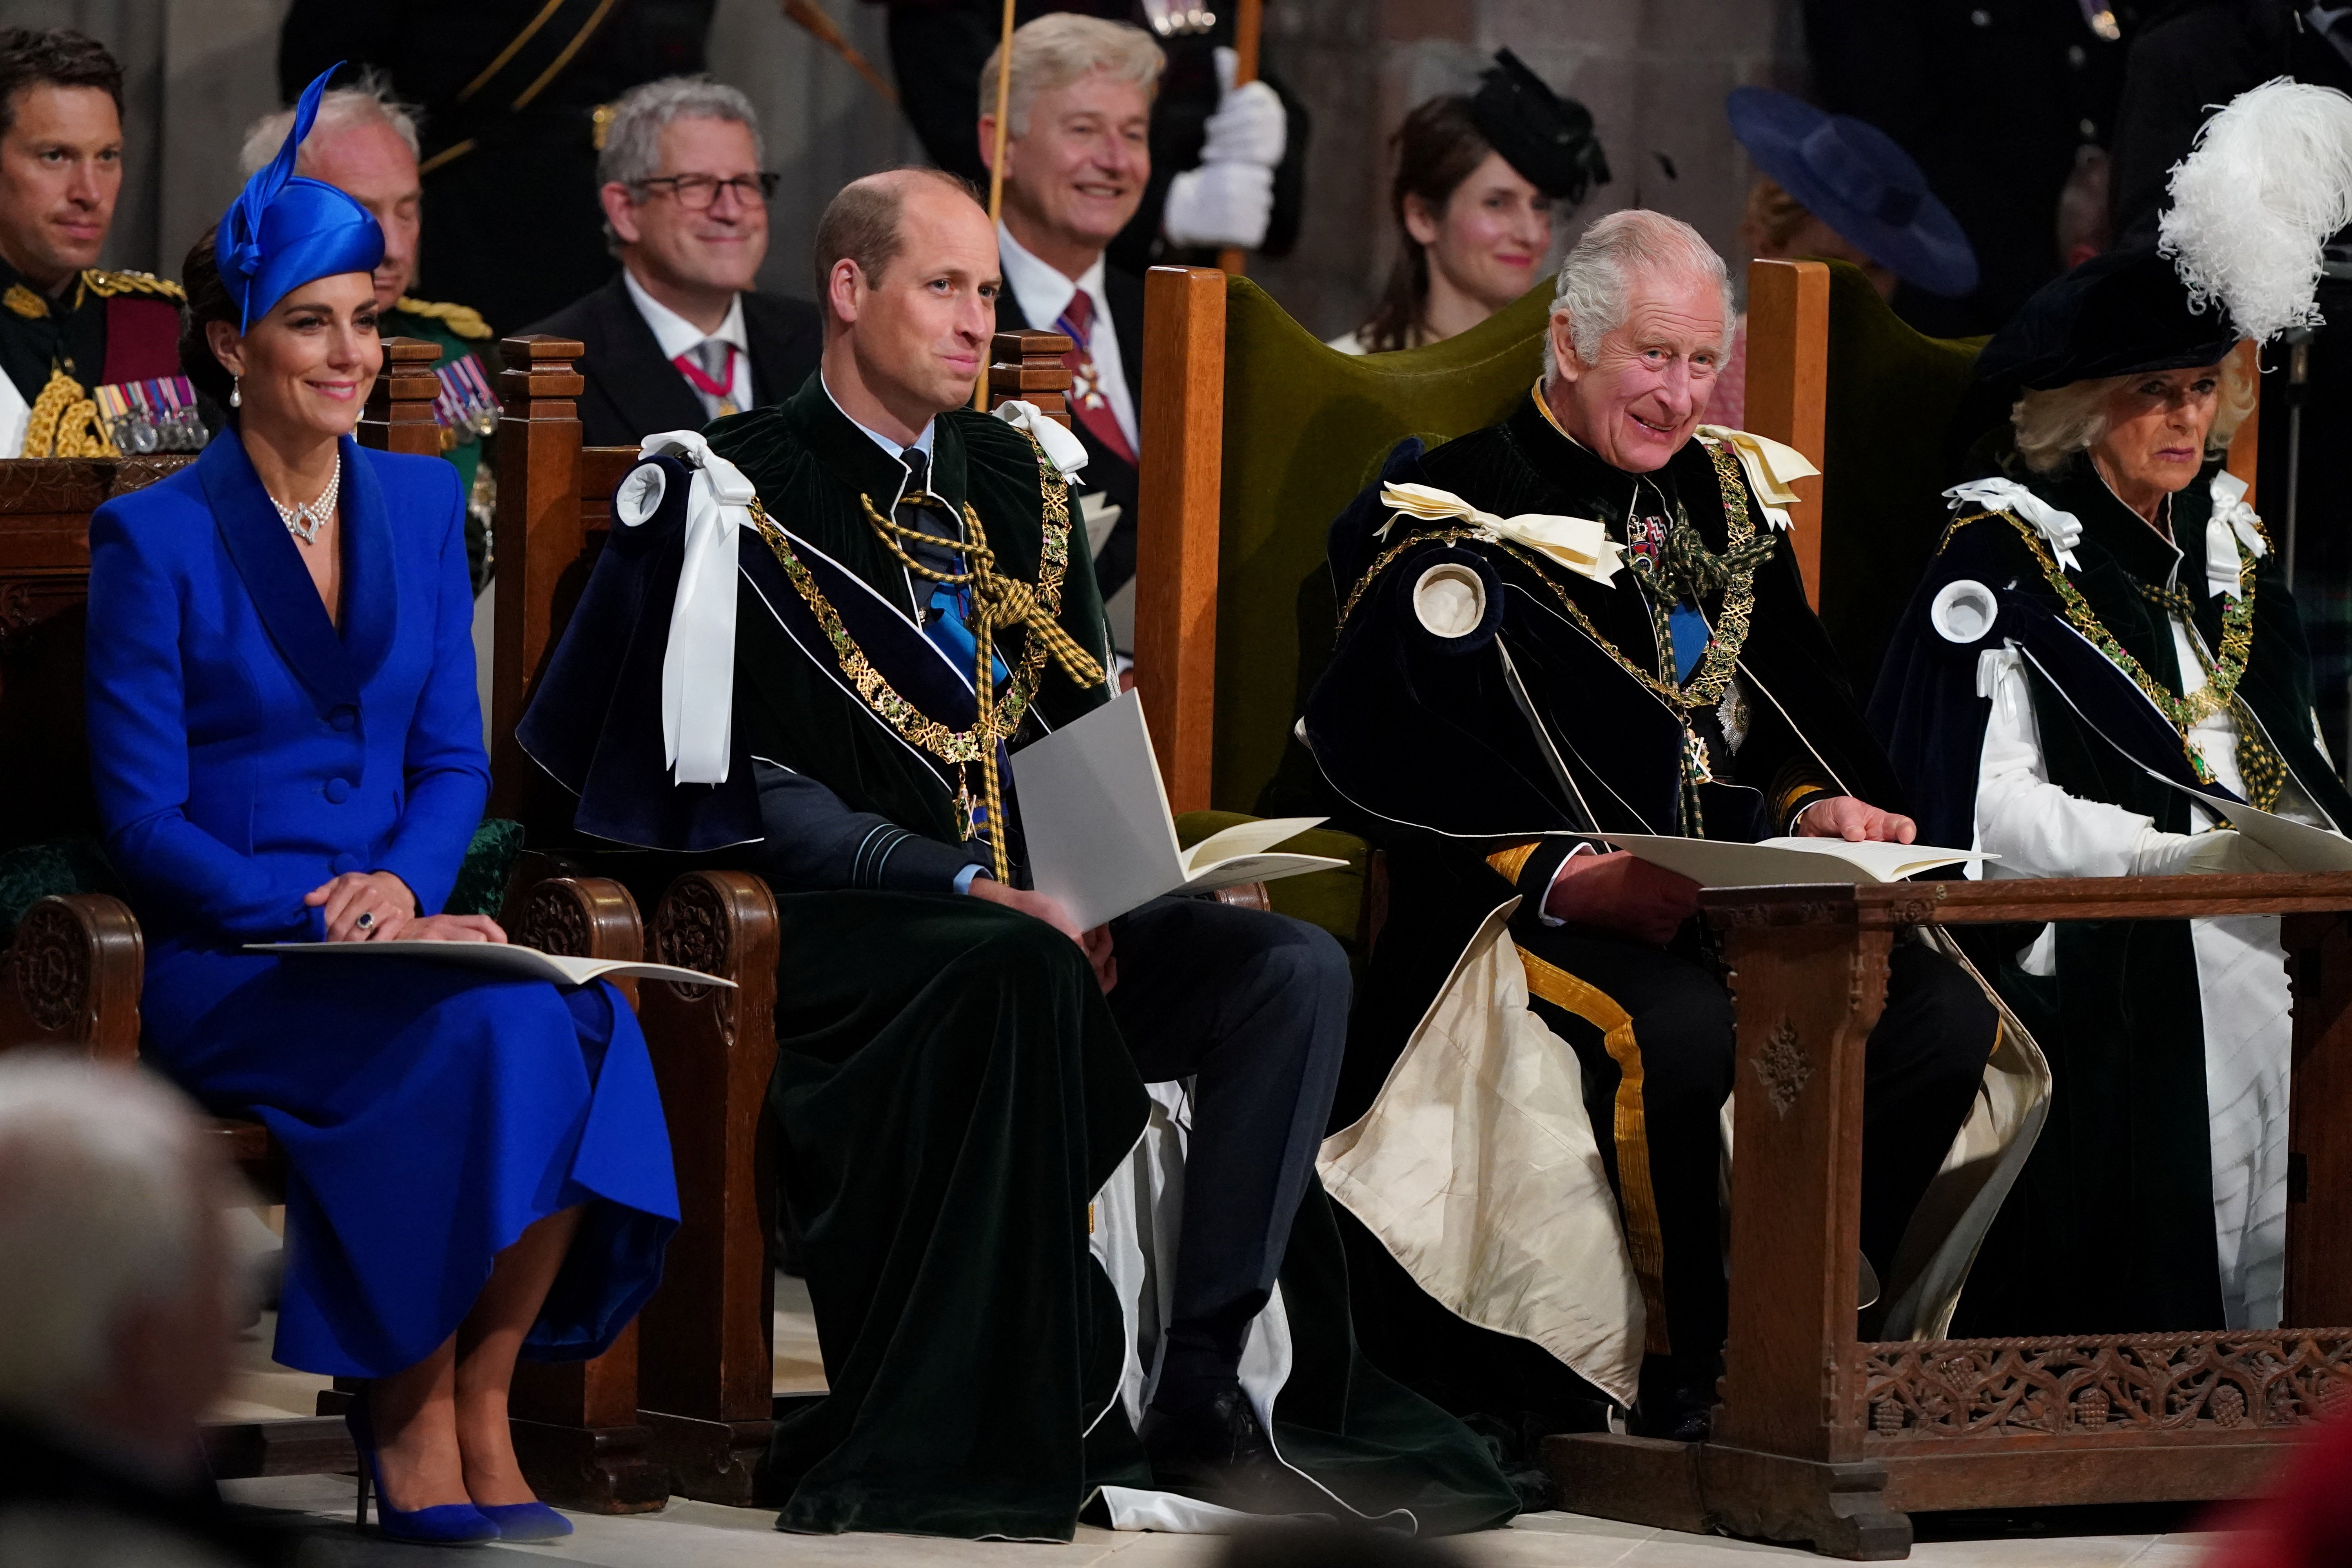 Prince William and Catherine, Princess of Wales, King Charles III and Queen Camilla at the crowning ceremony